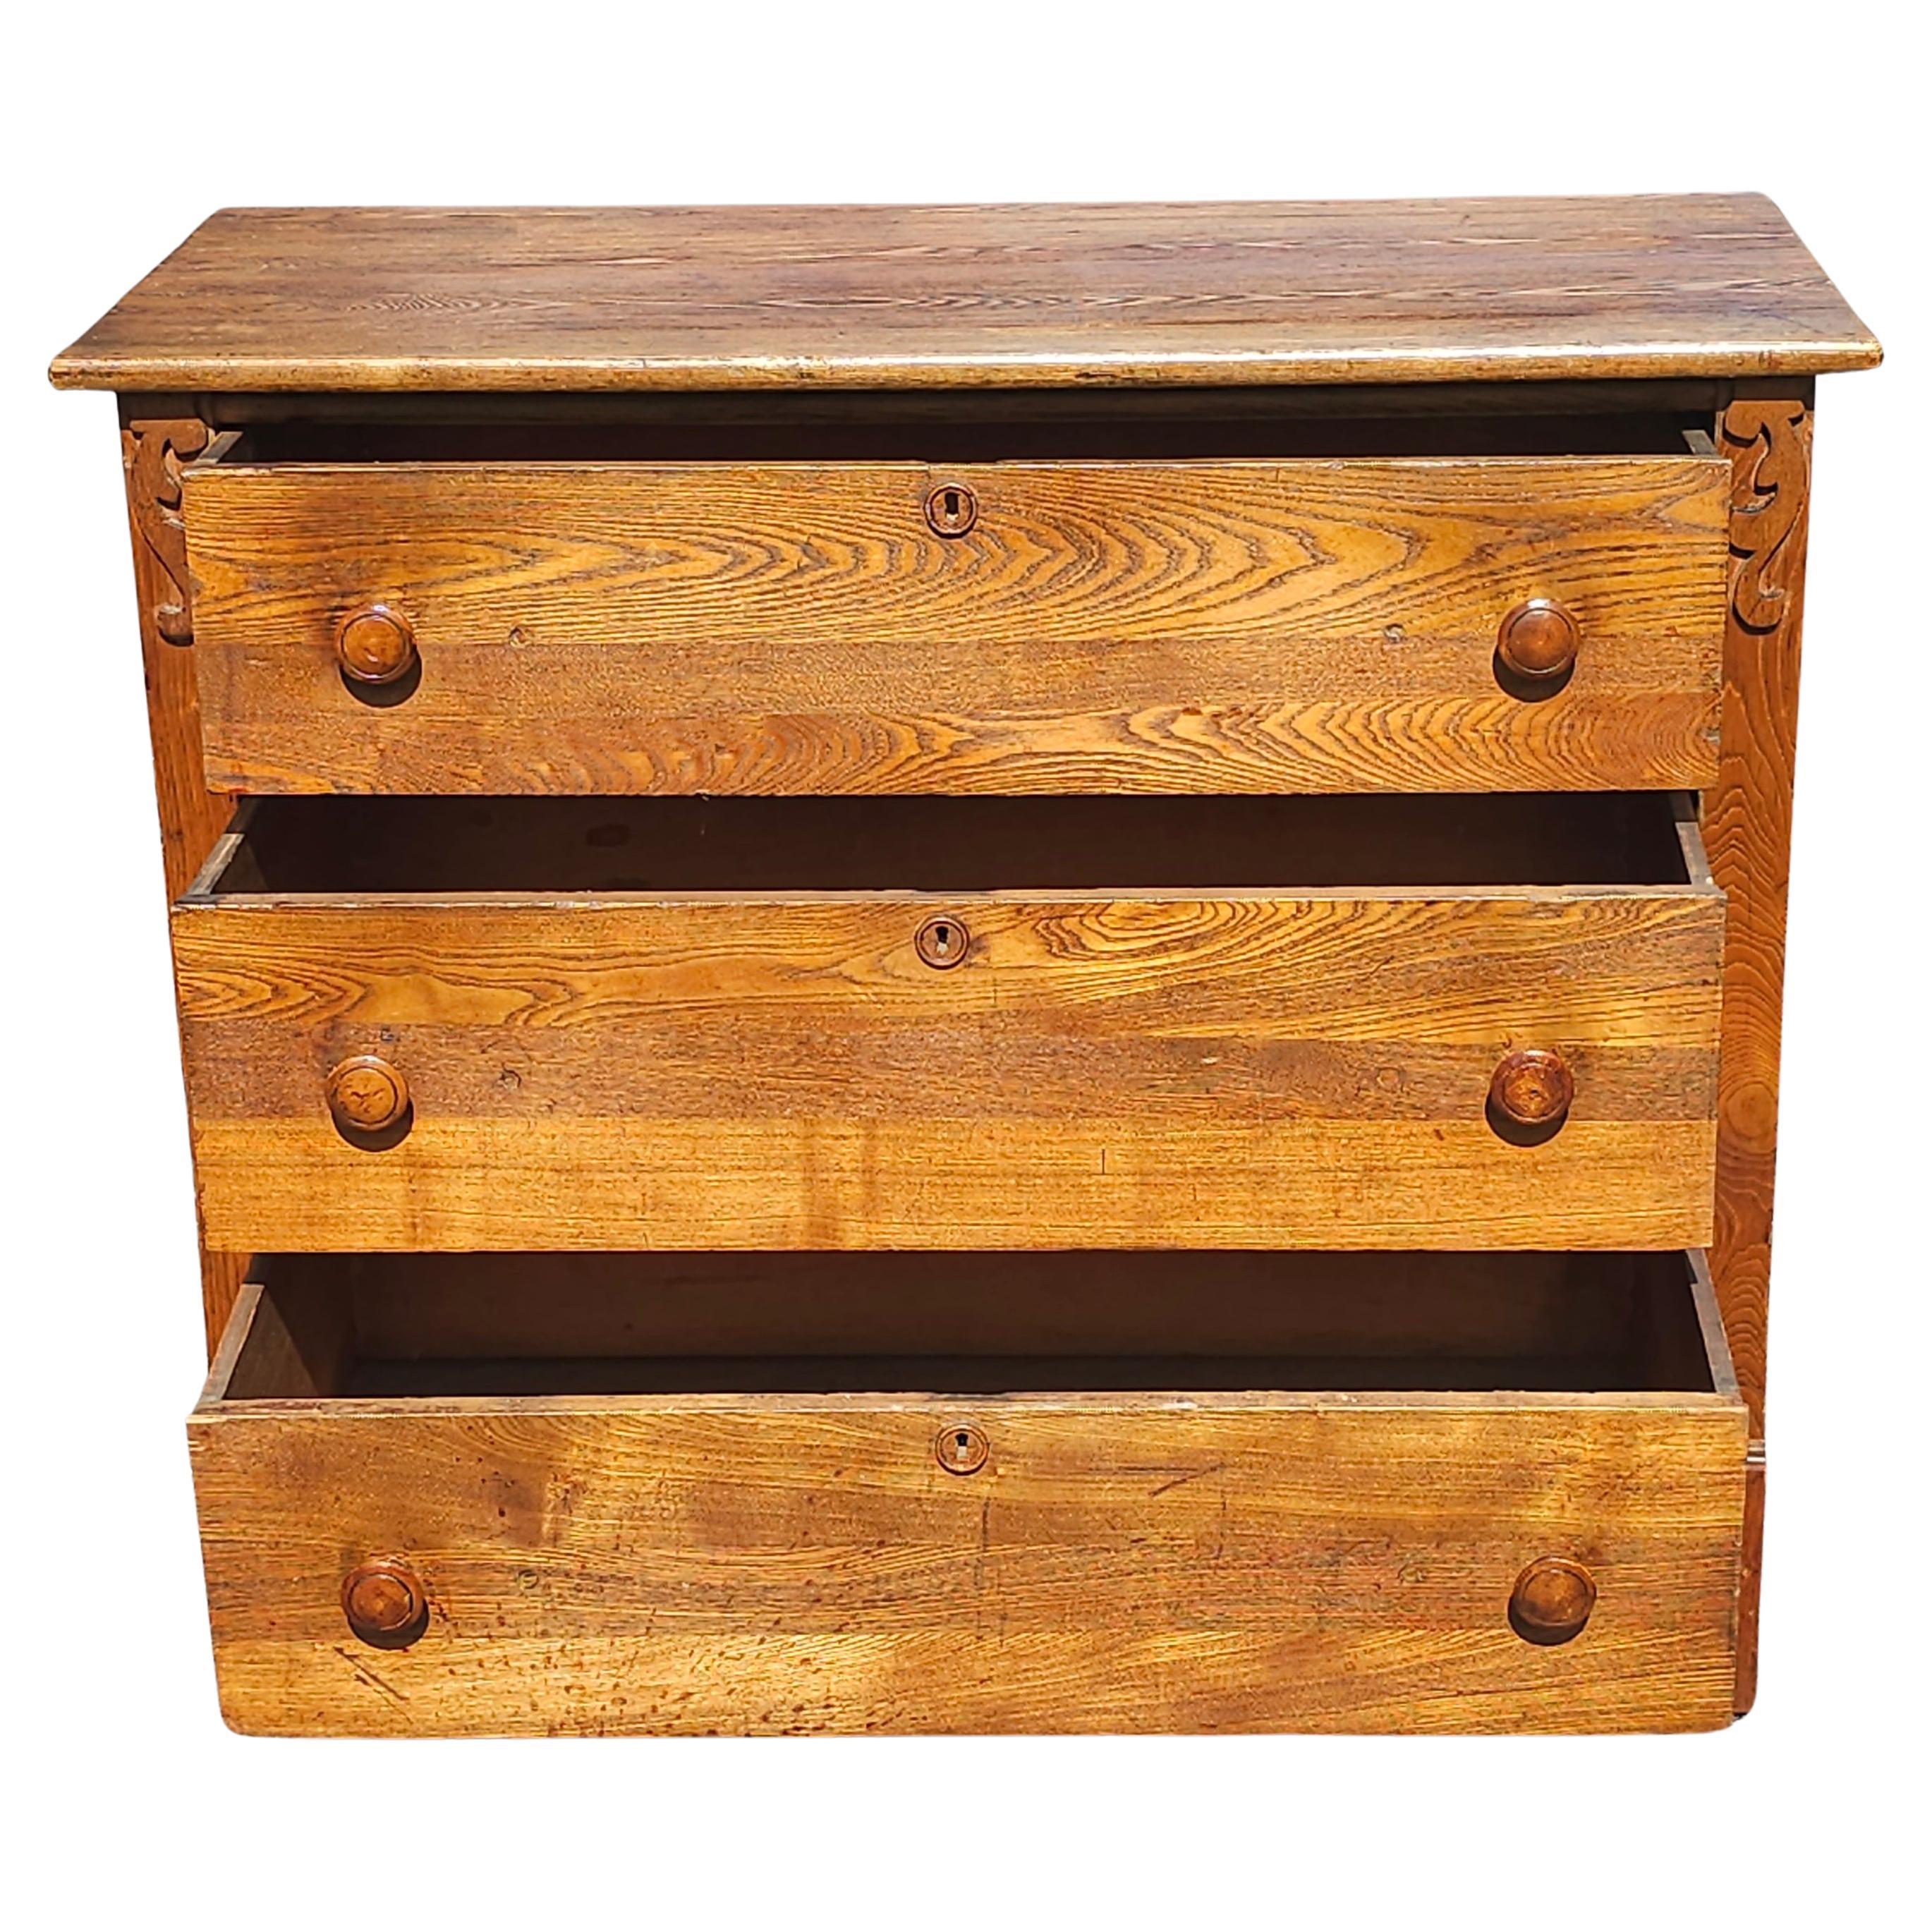 An late 19th Century to Early 20th Century Victorian solid Oak Commode / Chest of Drawers. Three functioning drawers with dovetail joints construction and nce patina. Measures 40